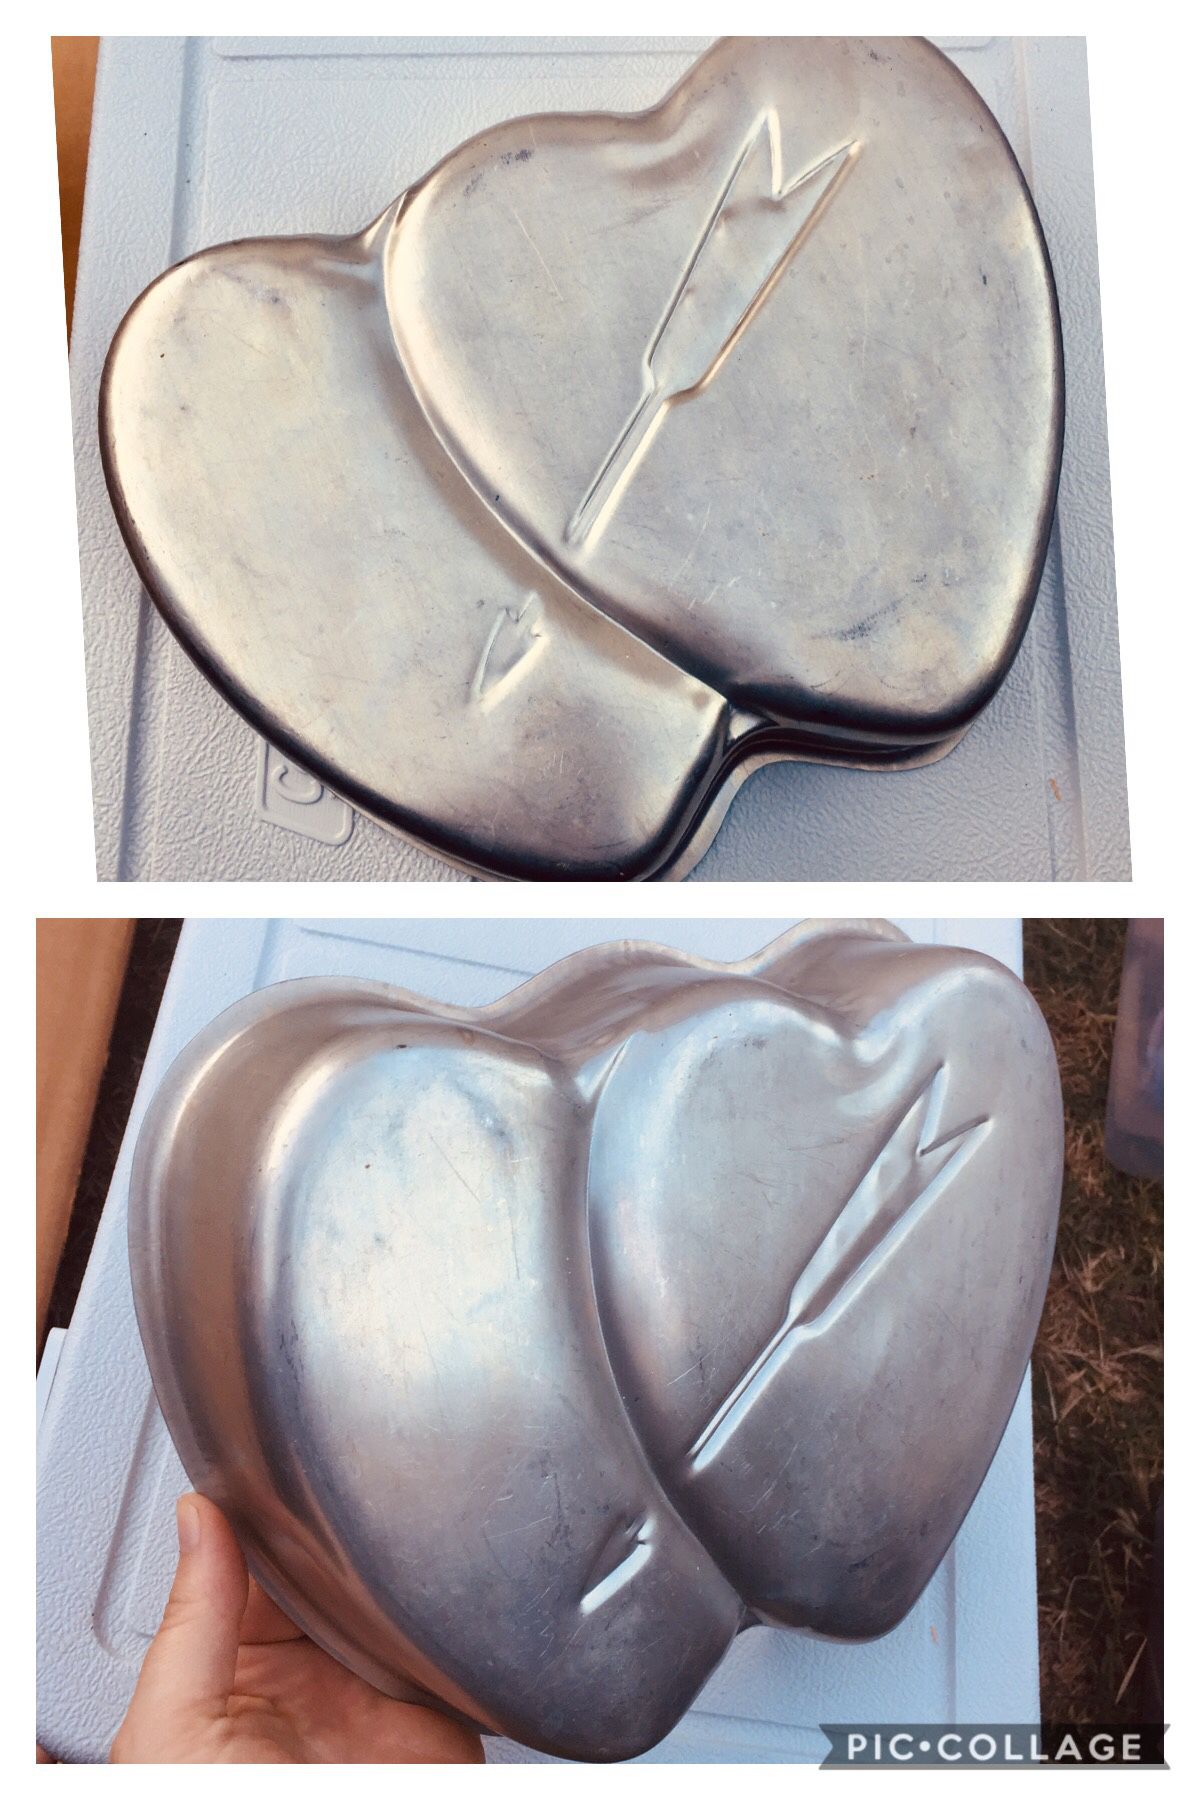 Two hearts with Cupid’s arrow cake pan or jello mold